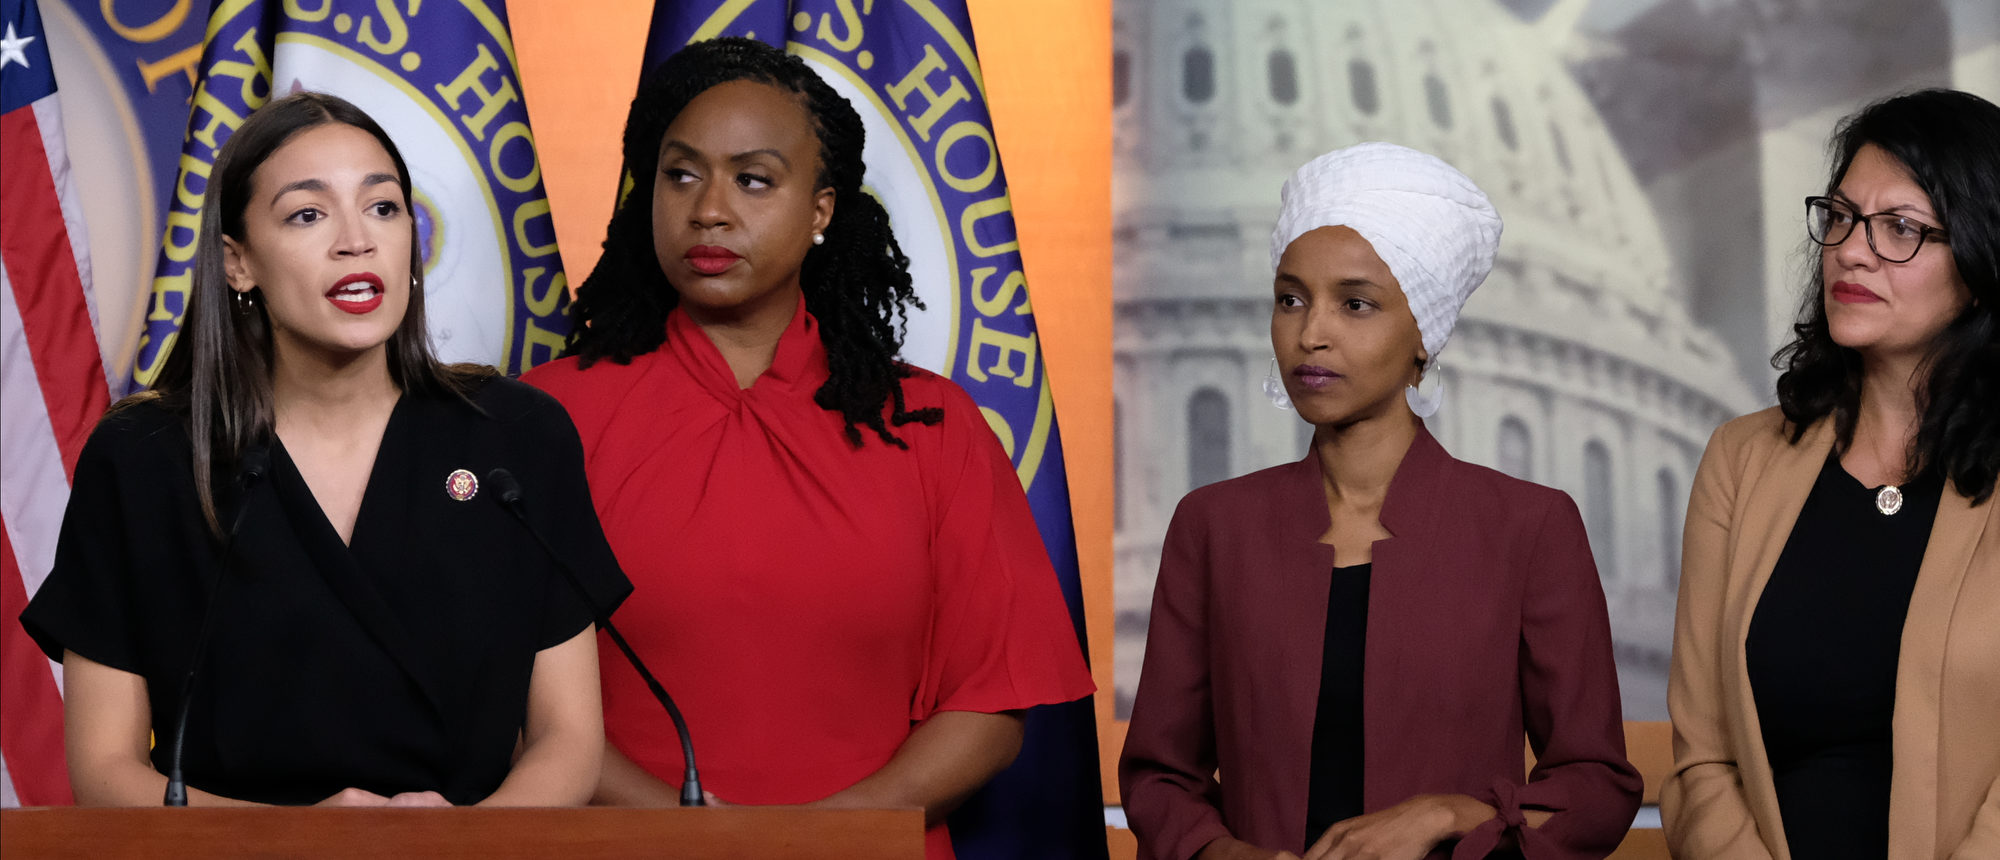 WASHINGTON, DC - JULY 15: U.S. Rep. Alexandria Ocasio-Cortez (D-NY) speaks as Reps. Ayanna Pressley (D-MA), Ilhan Omar (D-MN), and Rashida Tlaib (D-MI) listen during a press conference at the US Capitol on July 15, 2019 in Washington, DC. President Donald Trump stepped up his attacks on four progressive Democratic congresswomen, saying if they're not happy in the United States "they can leave." (Photo by Alex Wroblewski/Getty Images)